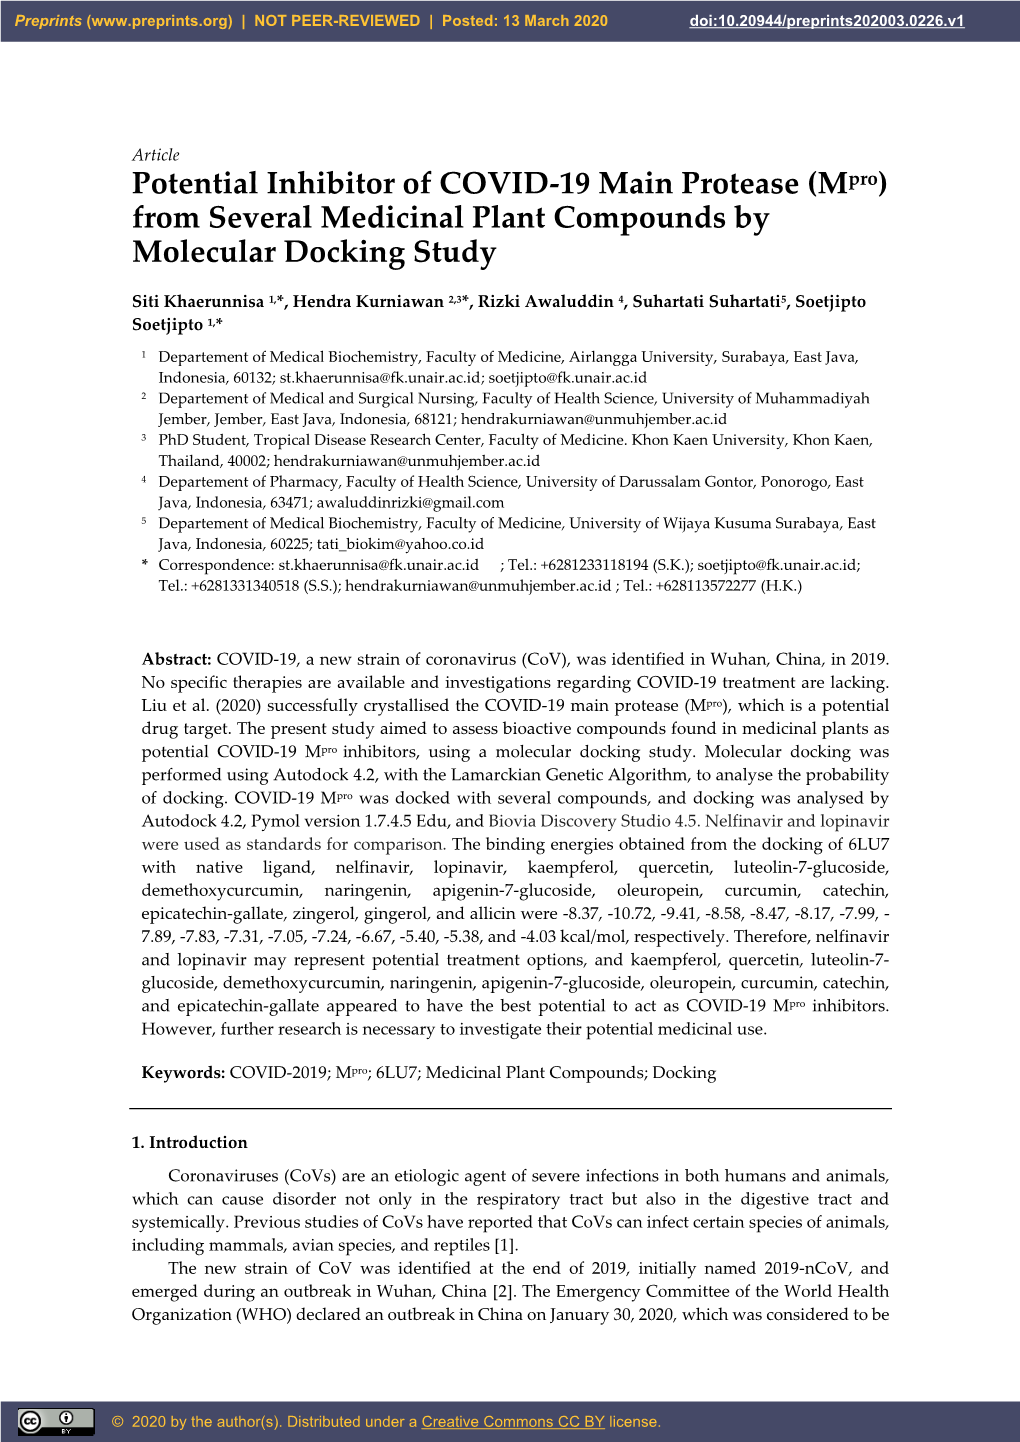 Potential Inhibitor of COVID-19 Main Protease (Mpro) from Several Medicinal Plant Compounds by Molecular Docking Study